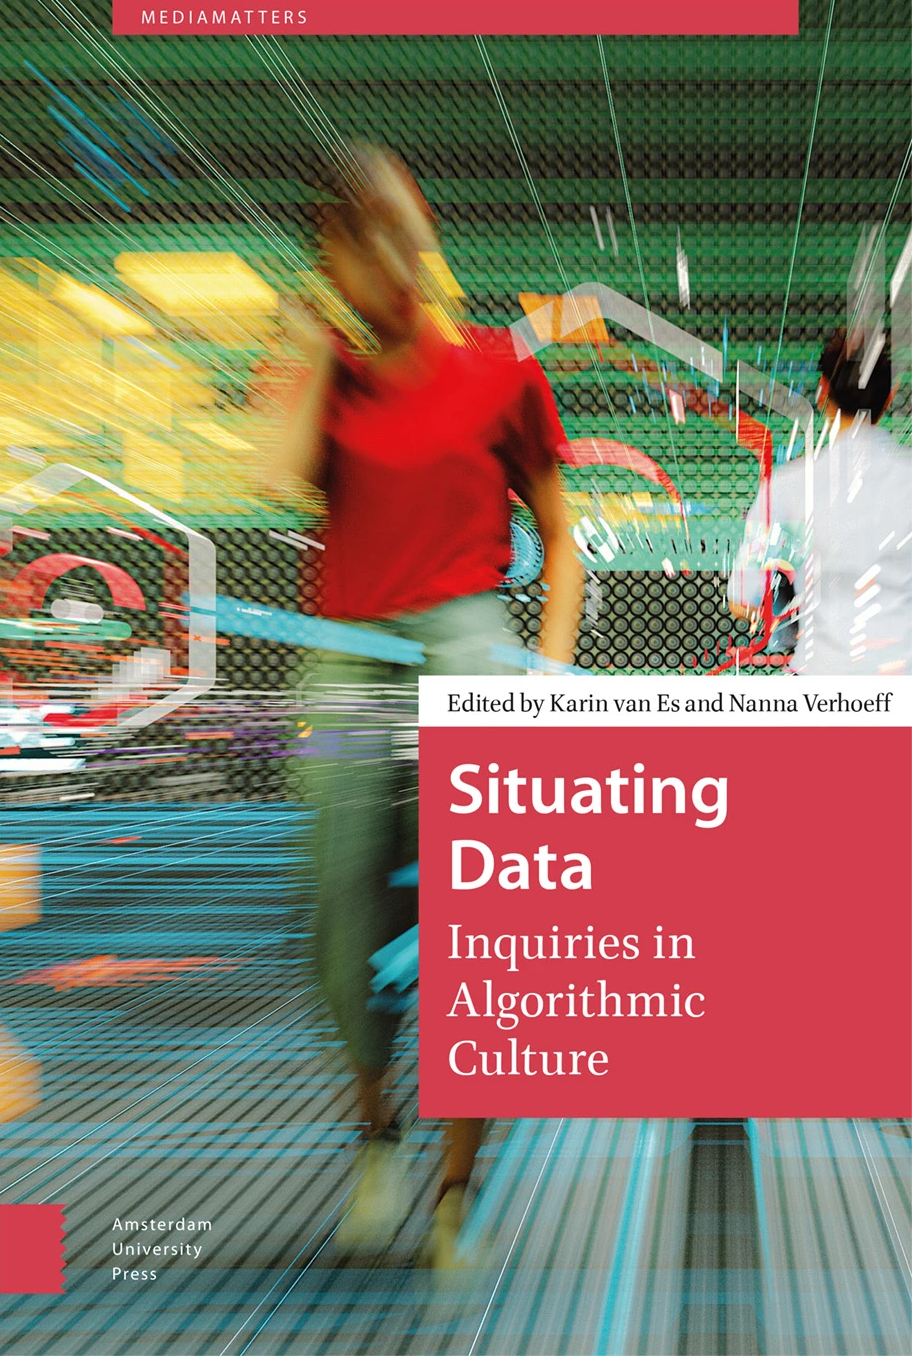 CDH Lecture: Situating Data – Inquiries in Algorithmic Culture